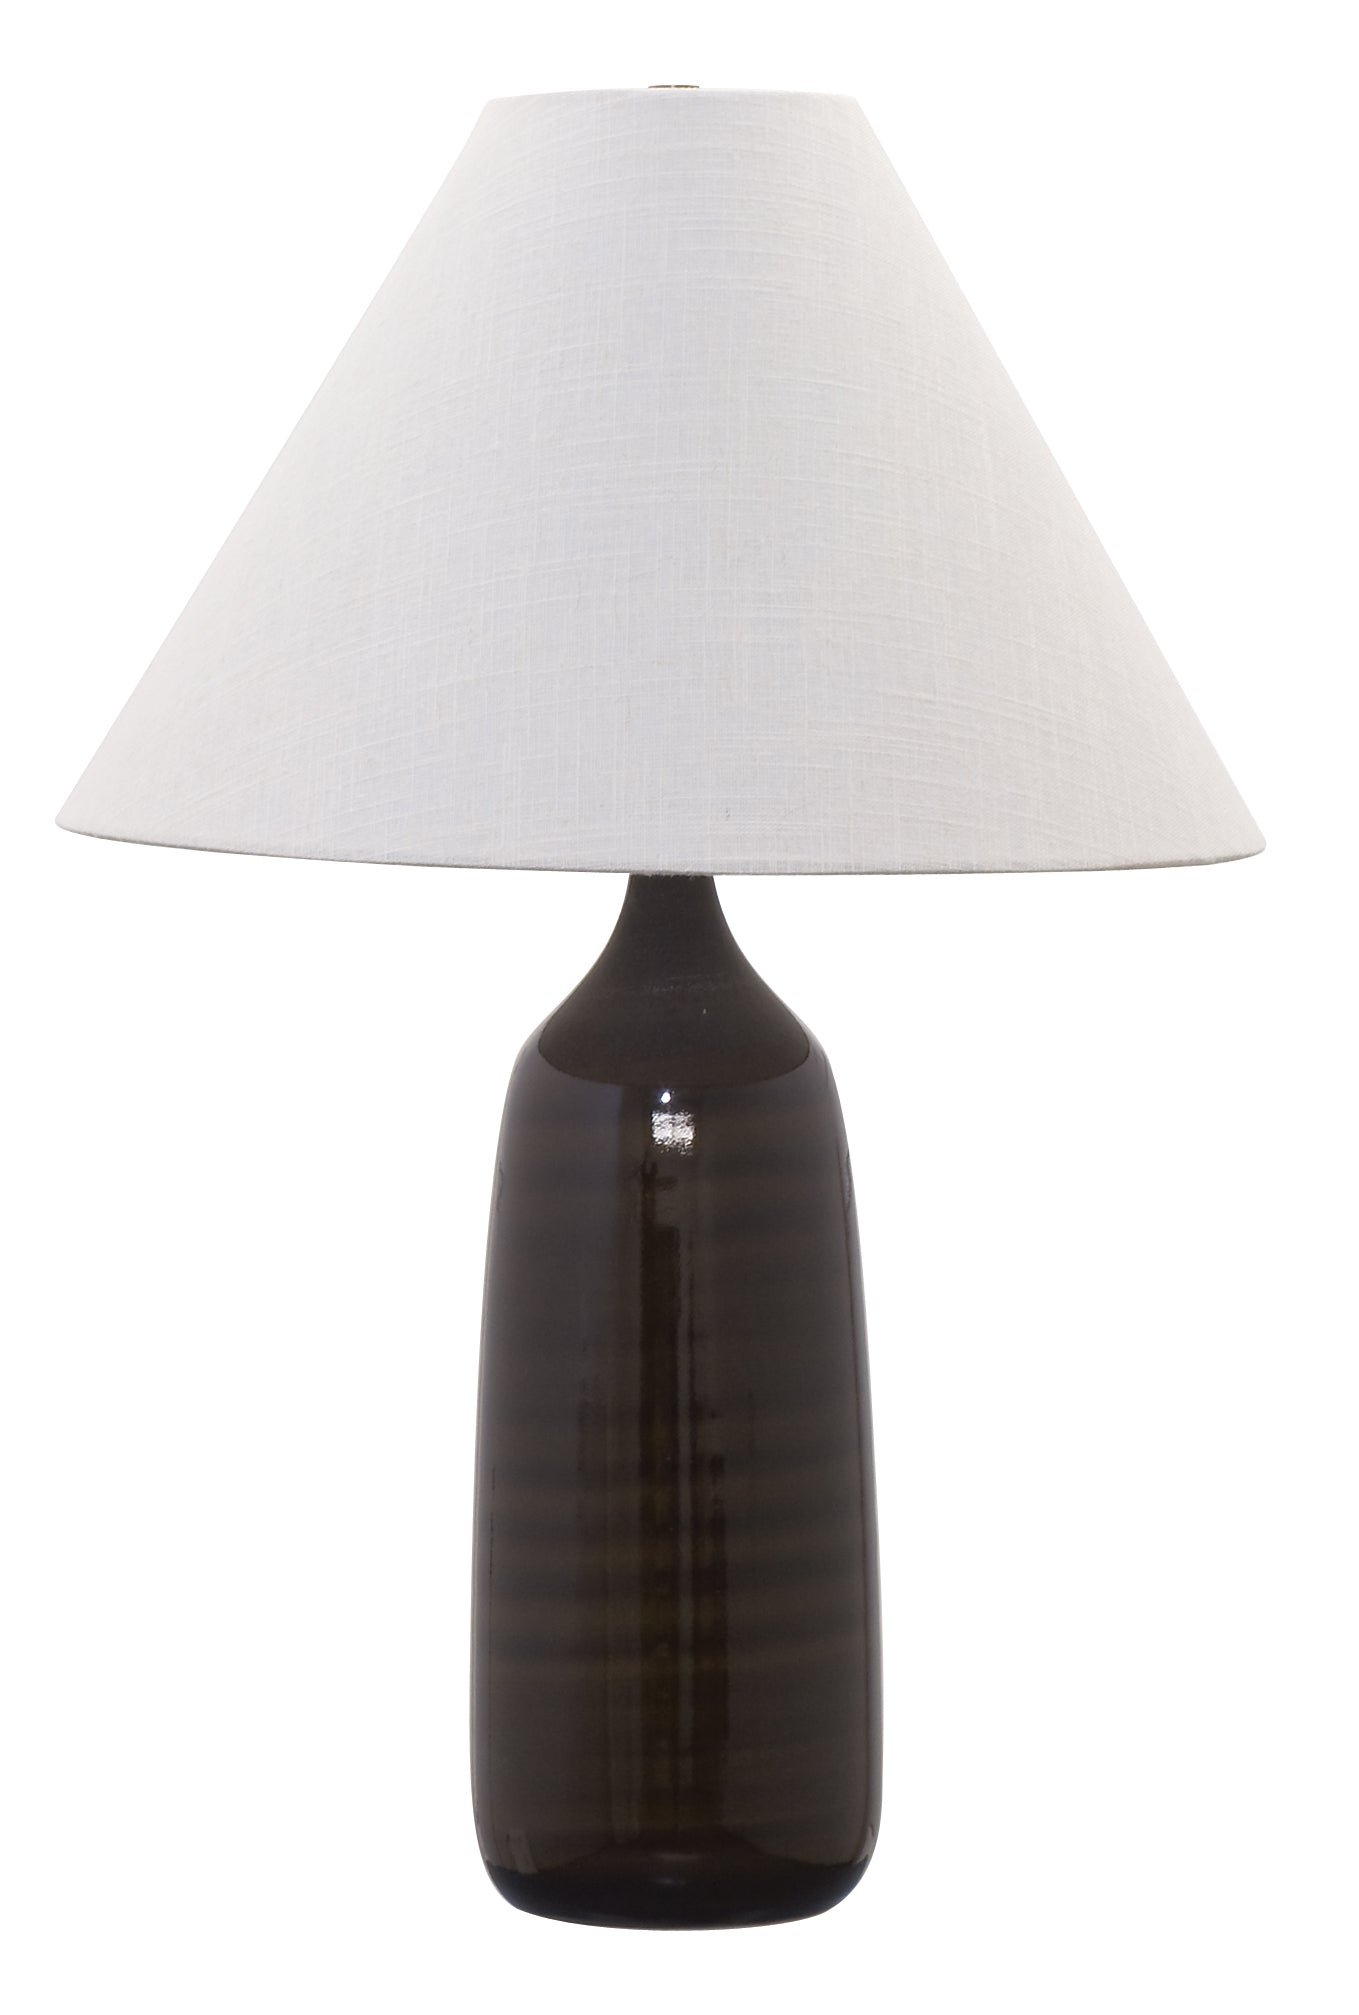 House of Troy Scatchard 25" Stoneware Table Lamp in Brown Gloss GS100-BR